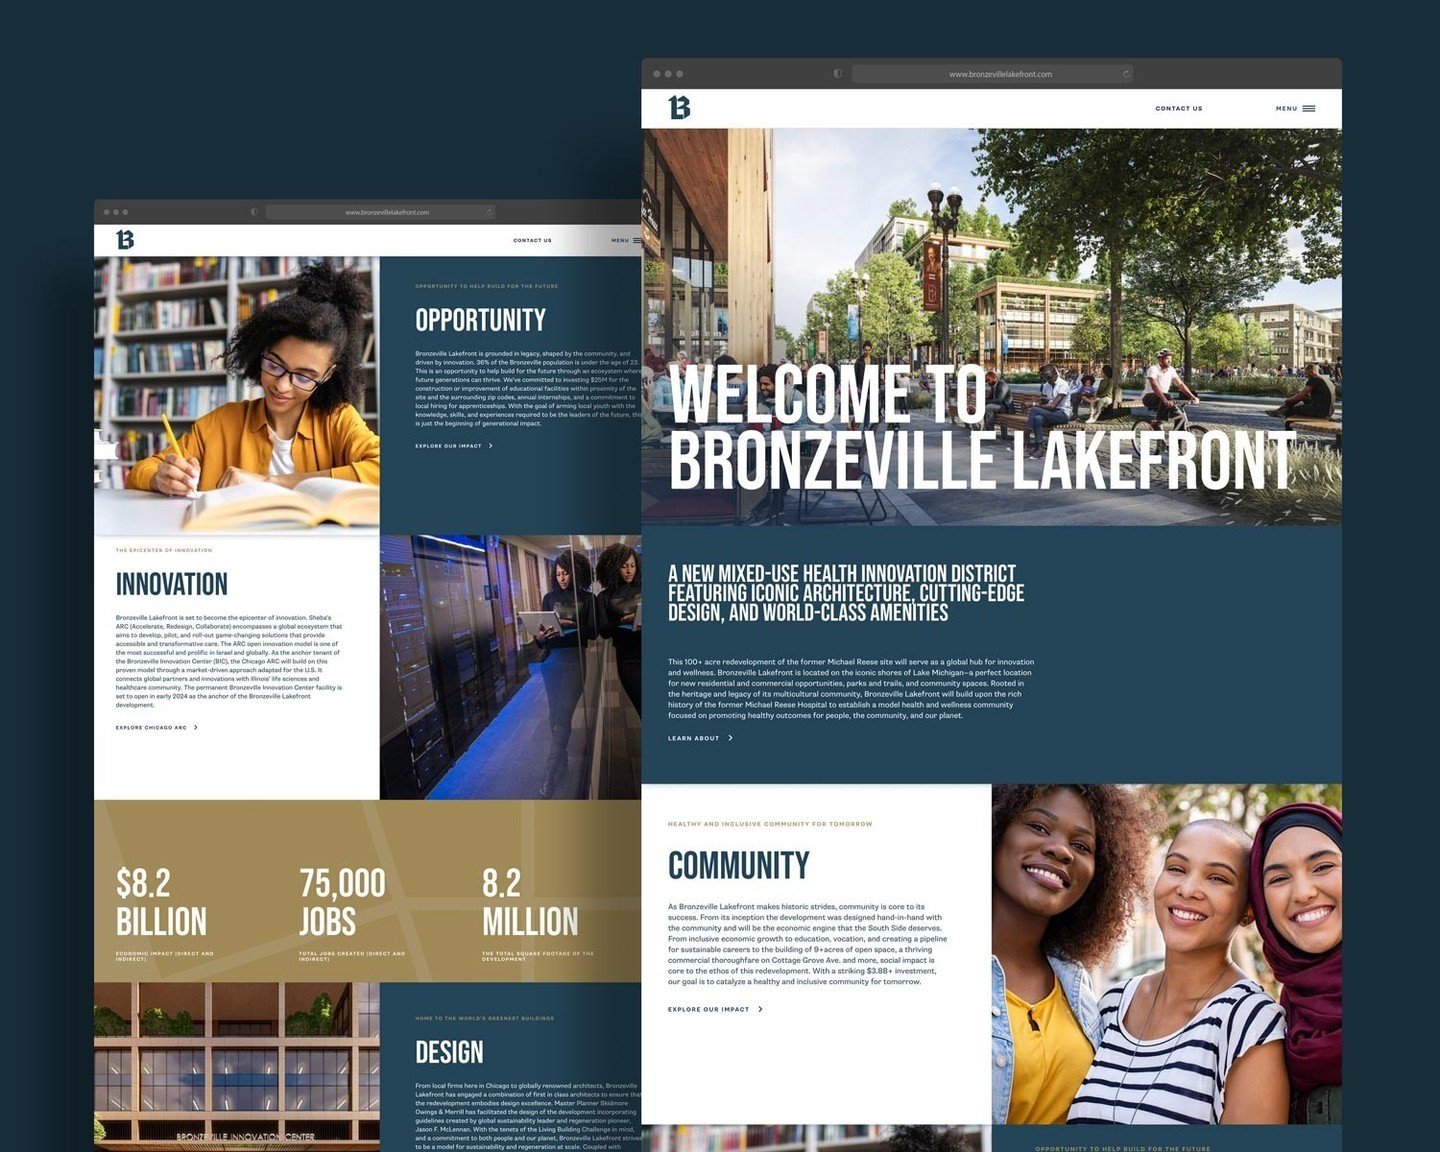 Experience digital excellence with Bronzeville Lakefront's website, crafted by us! 💻️ ⭐️ Looking to elevate your online presence? Our agency offers expert website design services tailored to your unique needs. Let's collaborate to bring your vision 